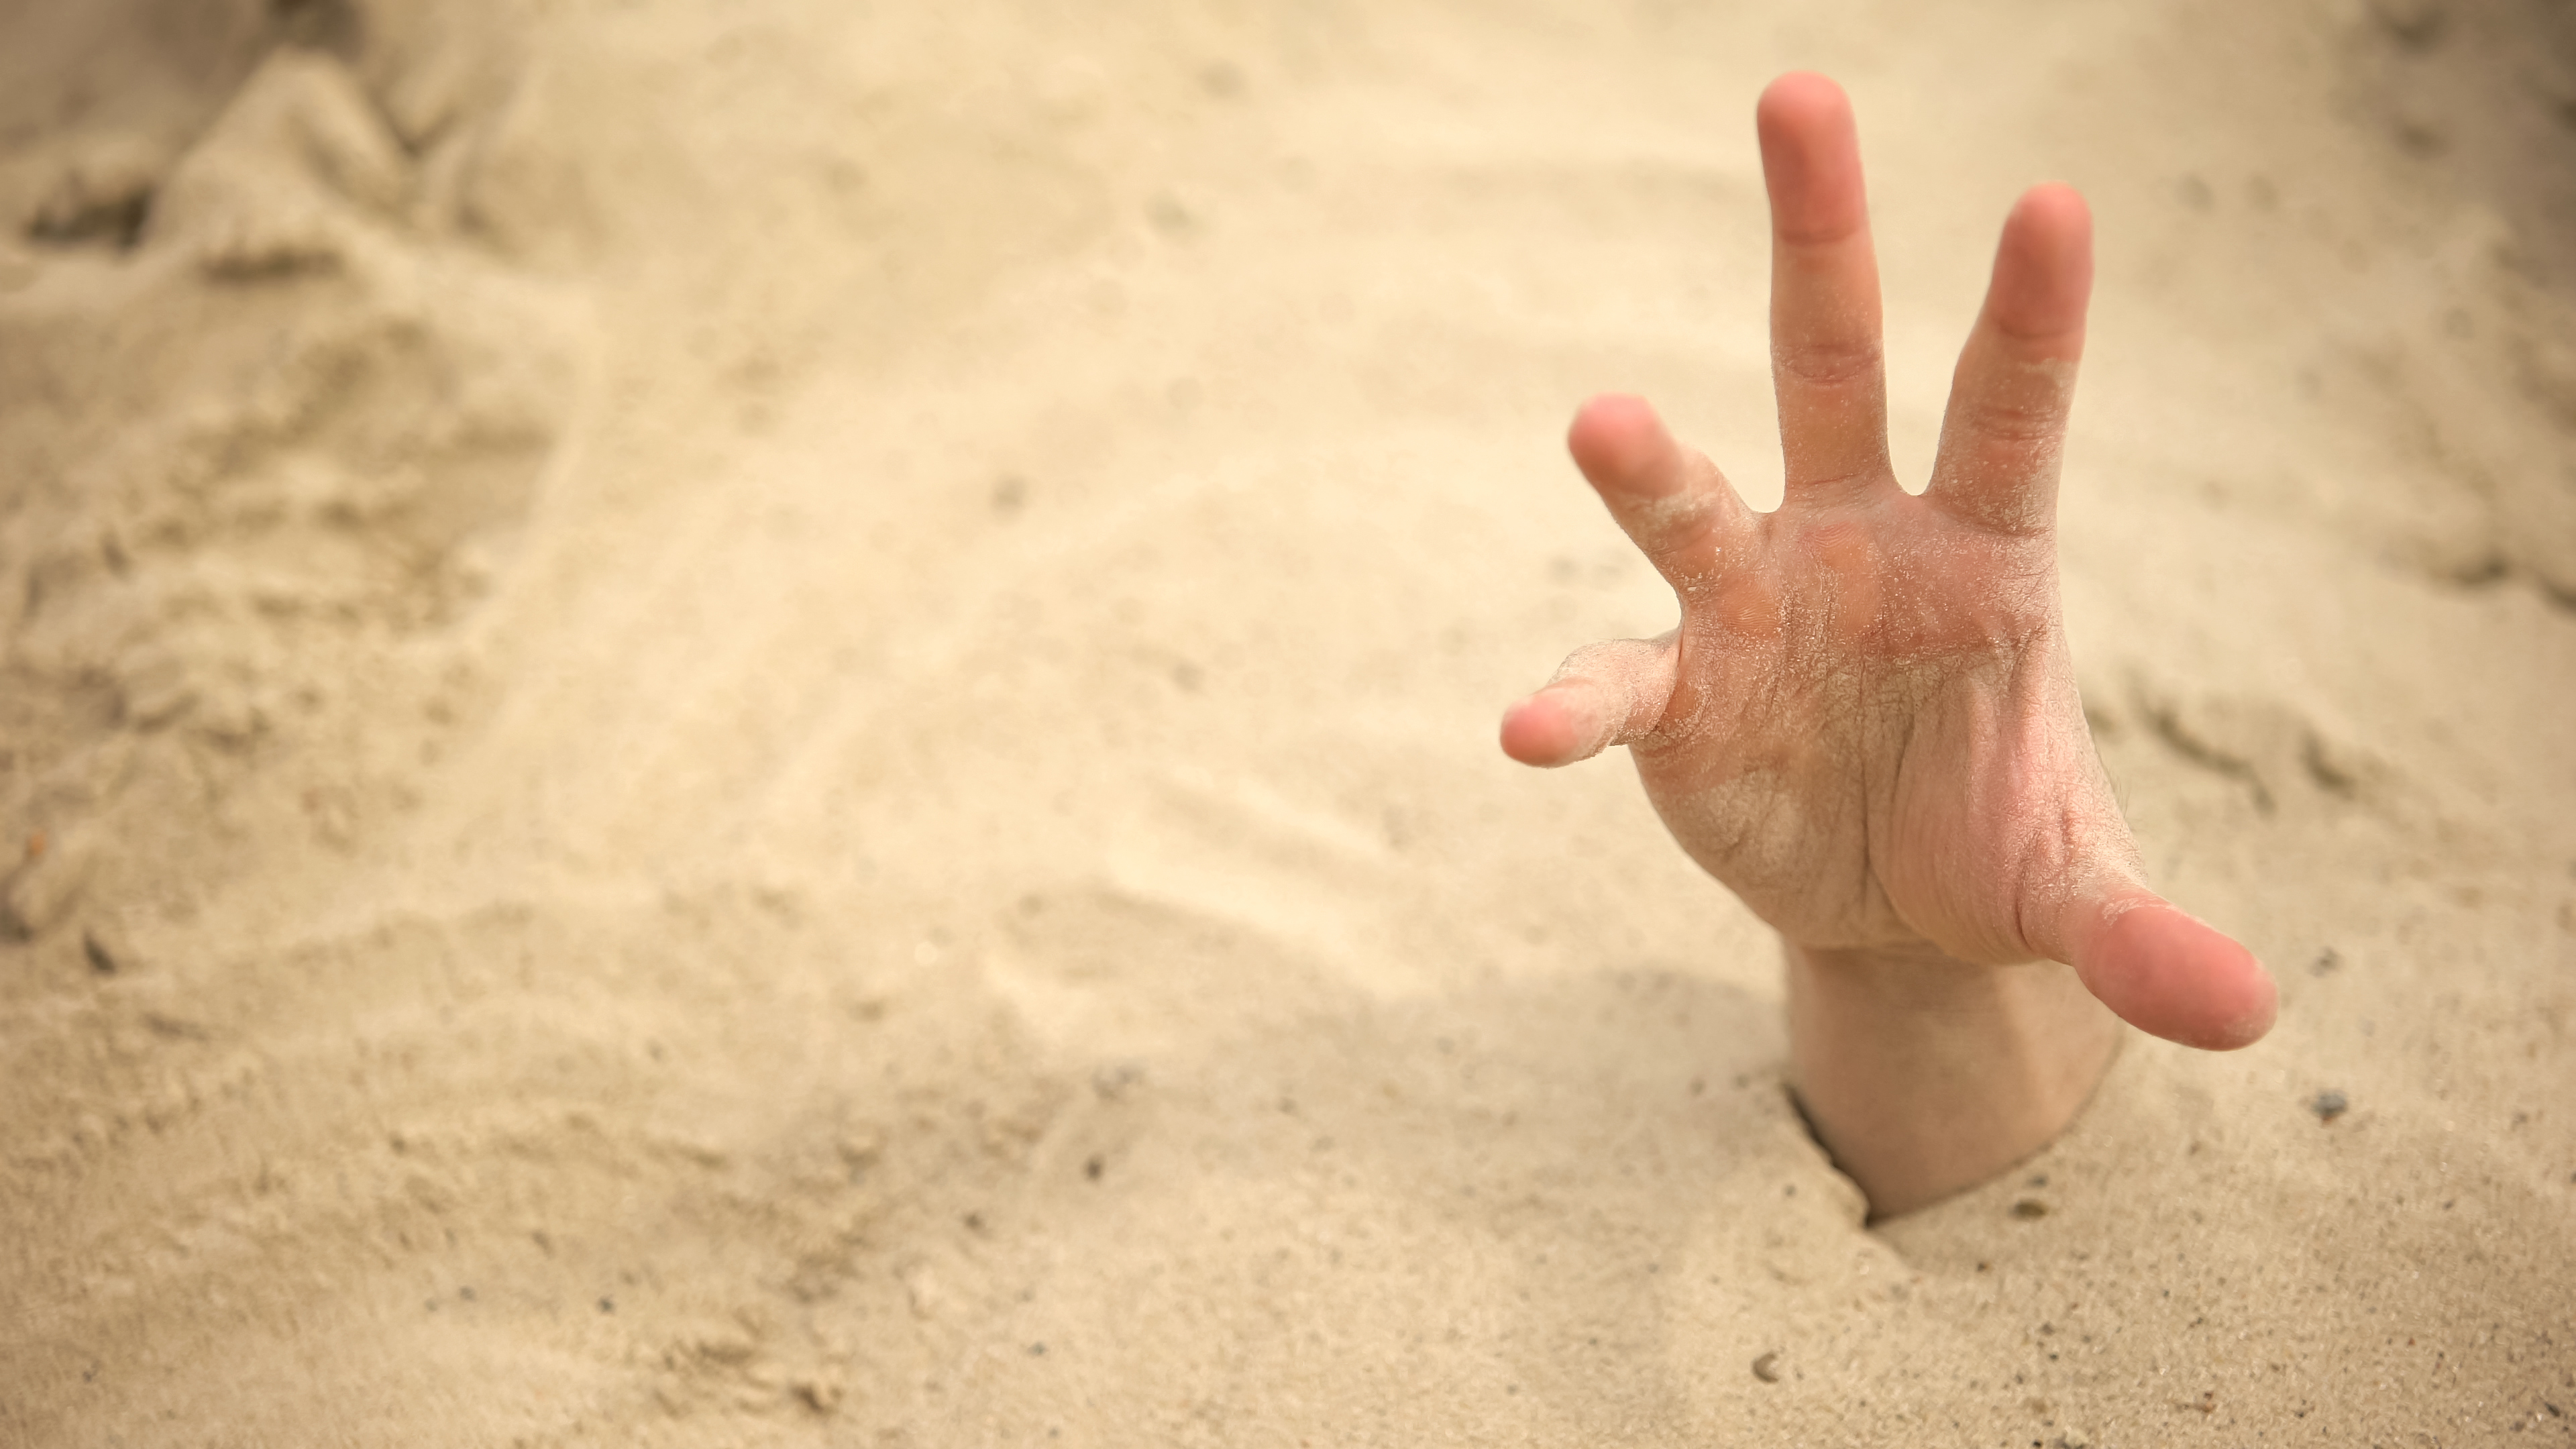 A hand sticking up out of the sand